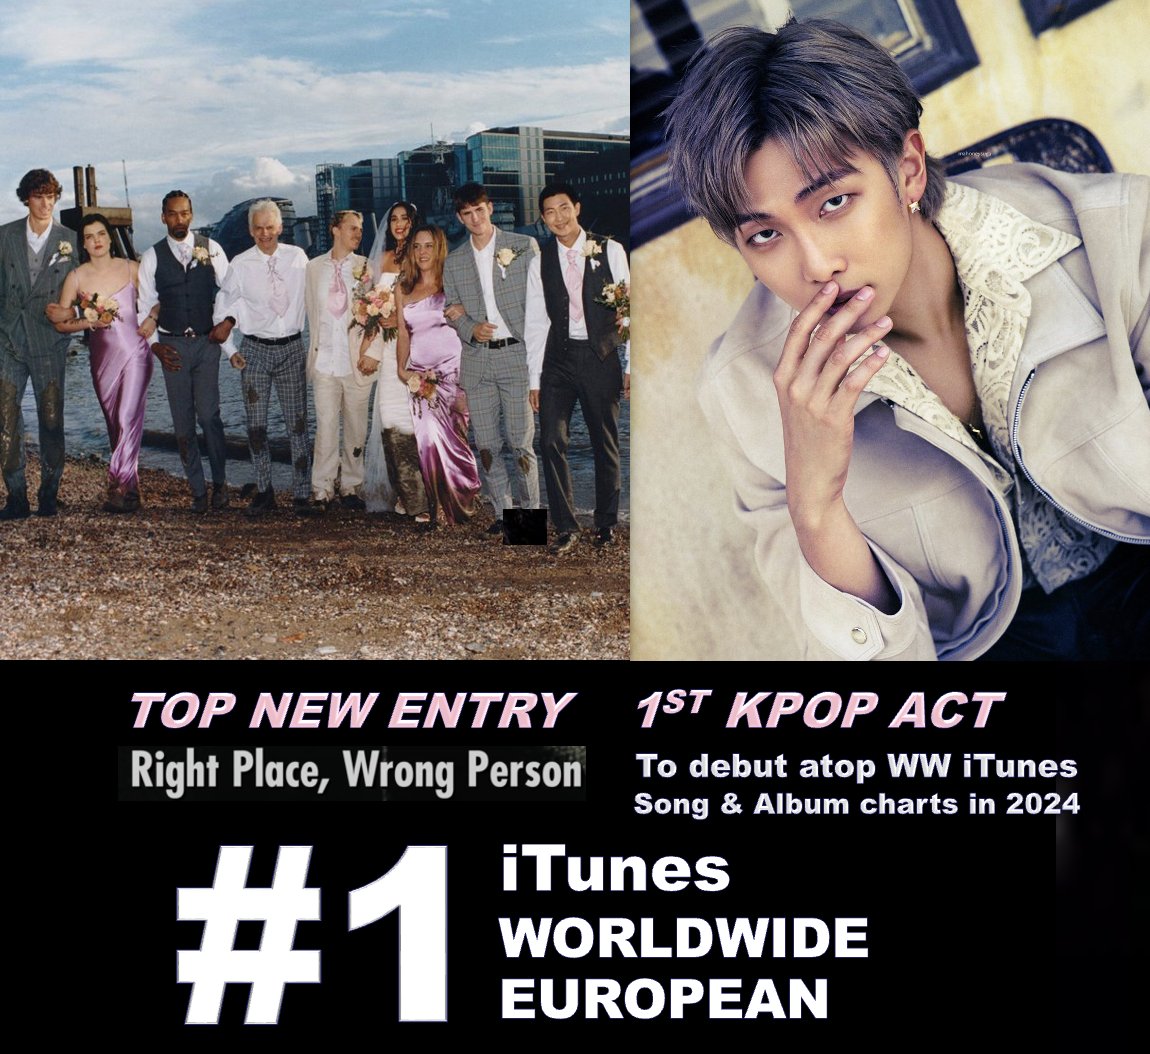 #RM is back with a huge Bang, the Biggest Act on iTunes, as his new smash hit 'LOST' debuts at #1 on the Worldwide & European iTunes Song charts after reaching #1 in 70+ countries and his much awaited new album 'Right Place, Wrong Person' lands atop the Worldwide & European